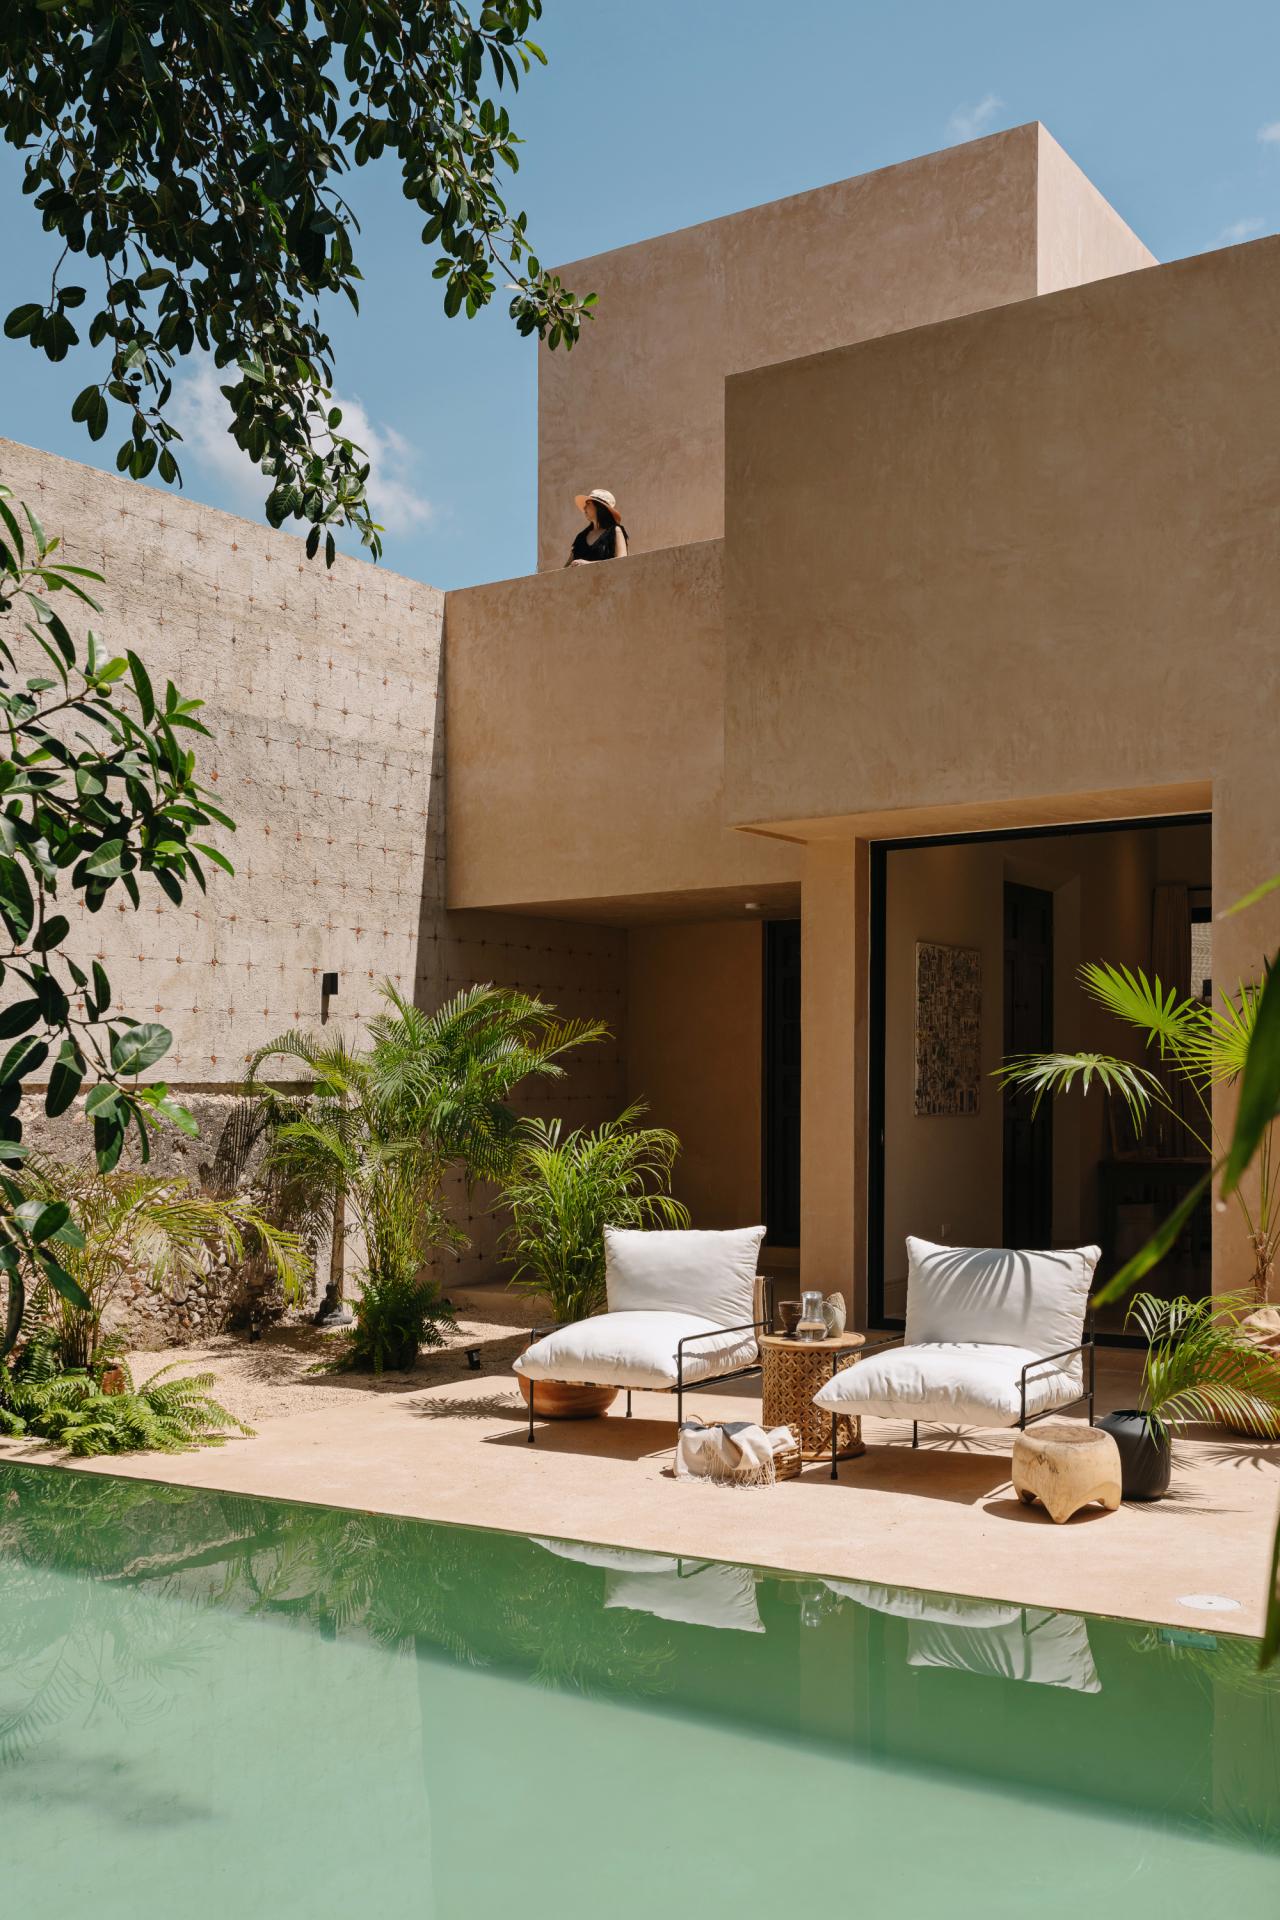 A 20th-century house in Merida, Mexico gets a fresh makeover